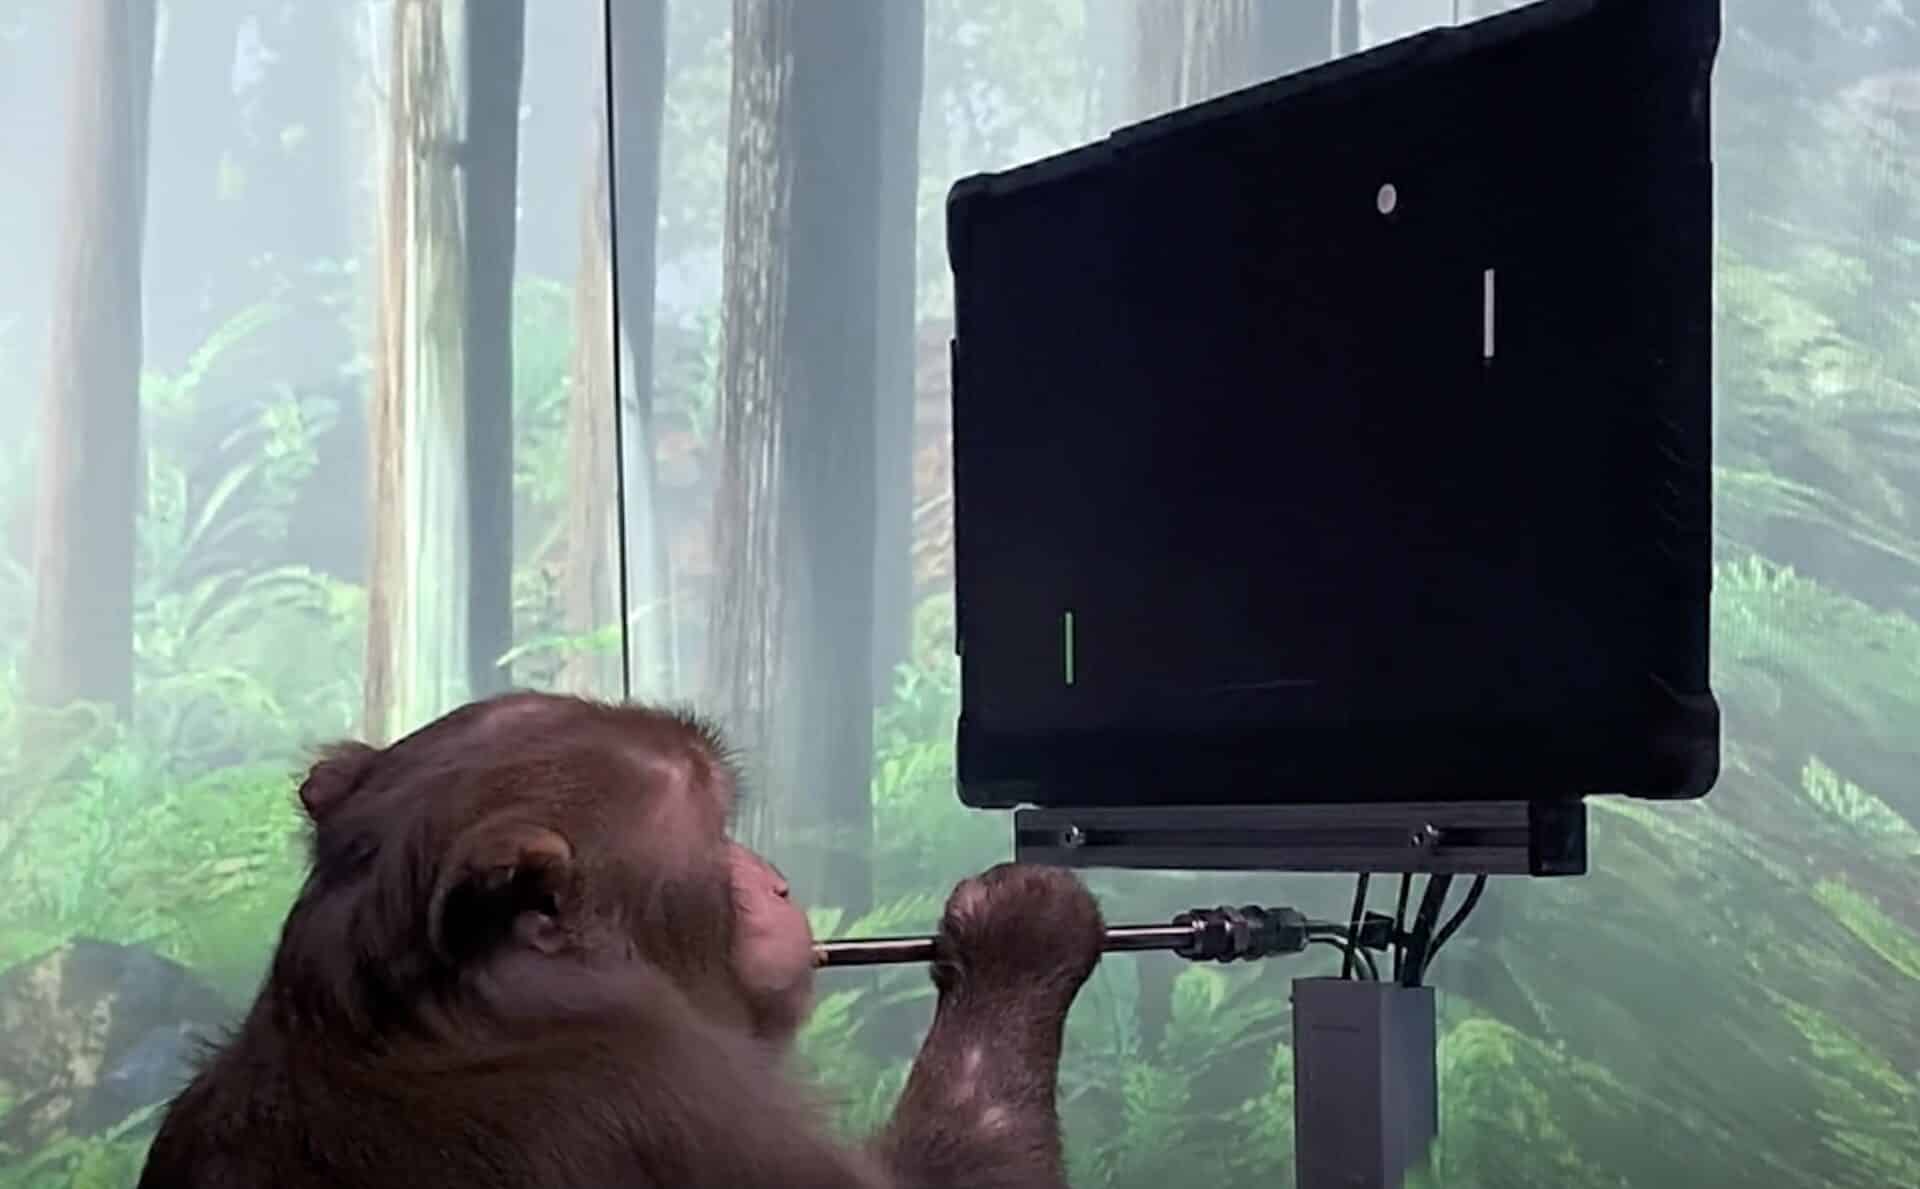 Elon Musk’s Neuralink lets a Monkey play video game using its thoughts